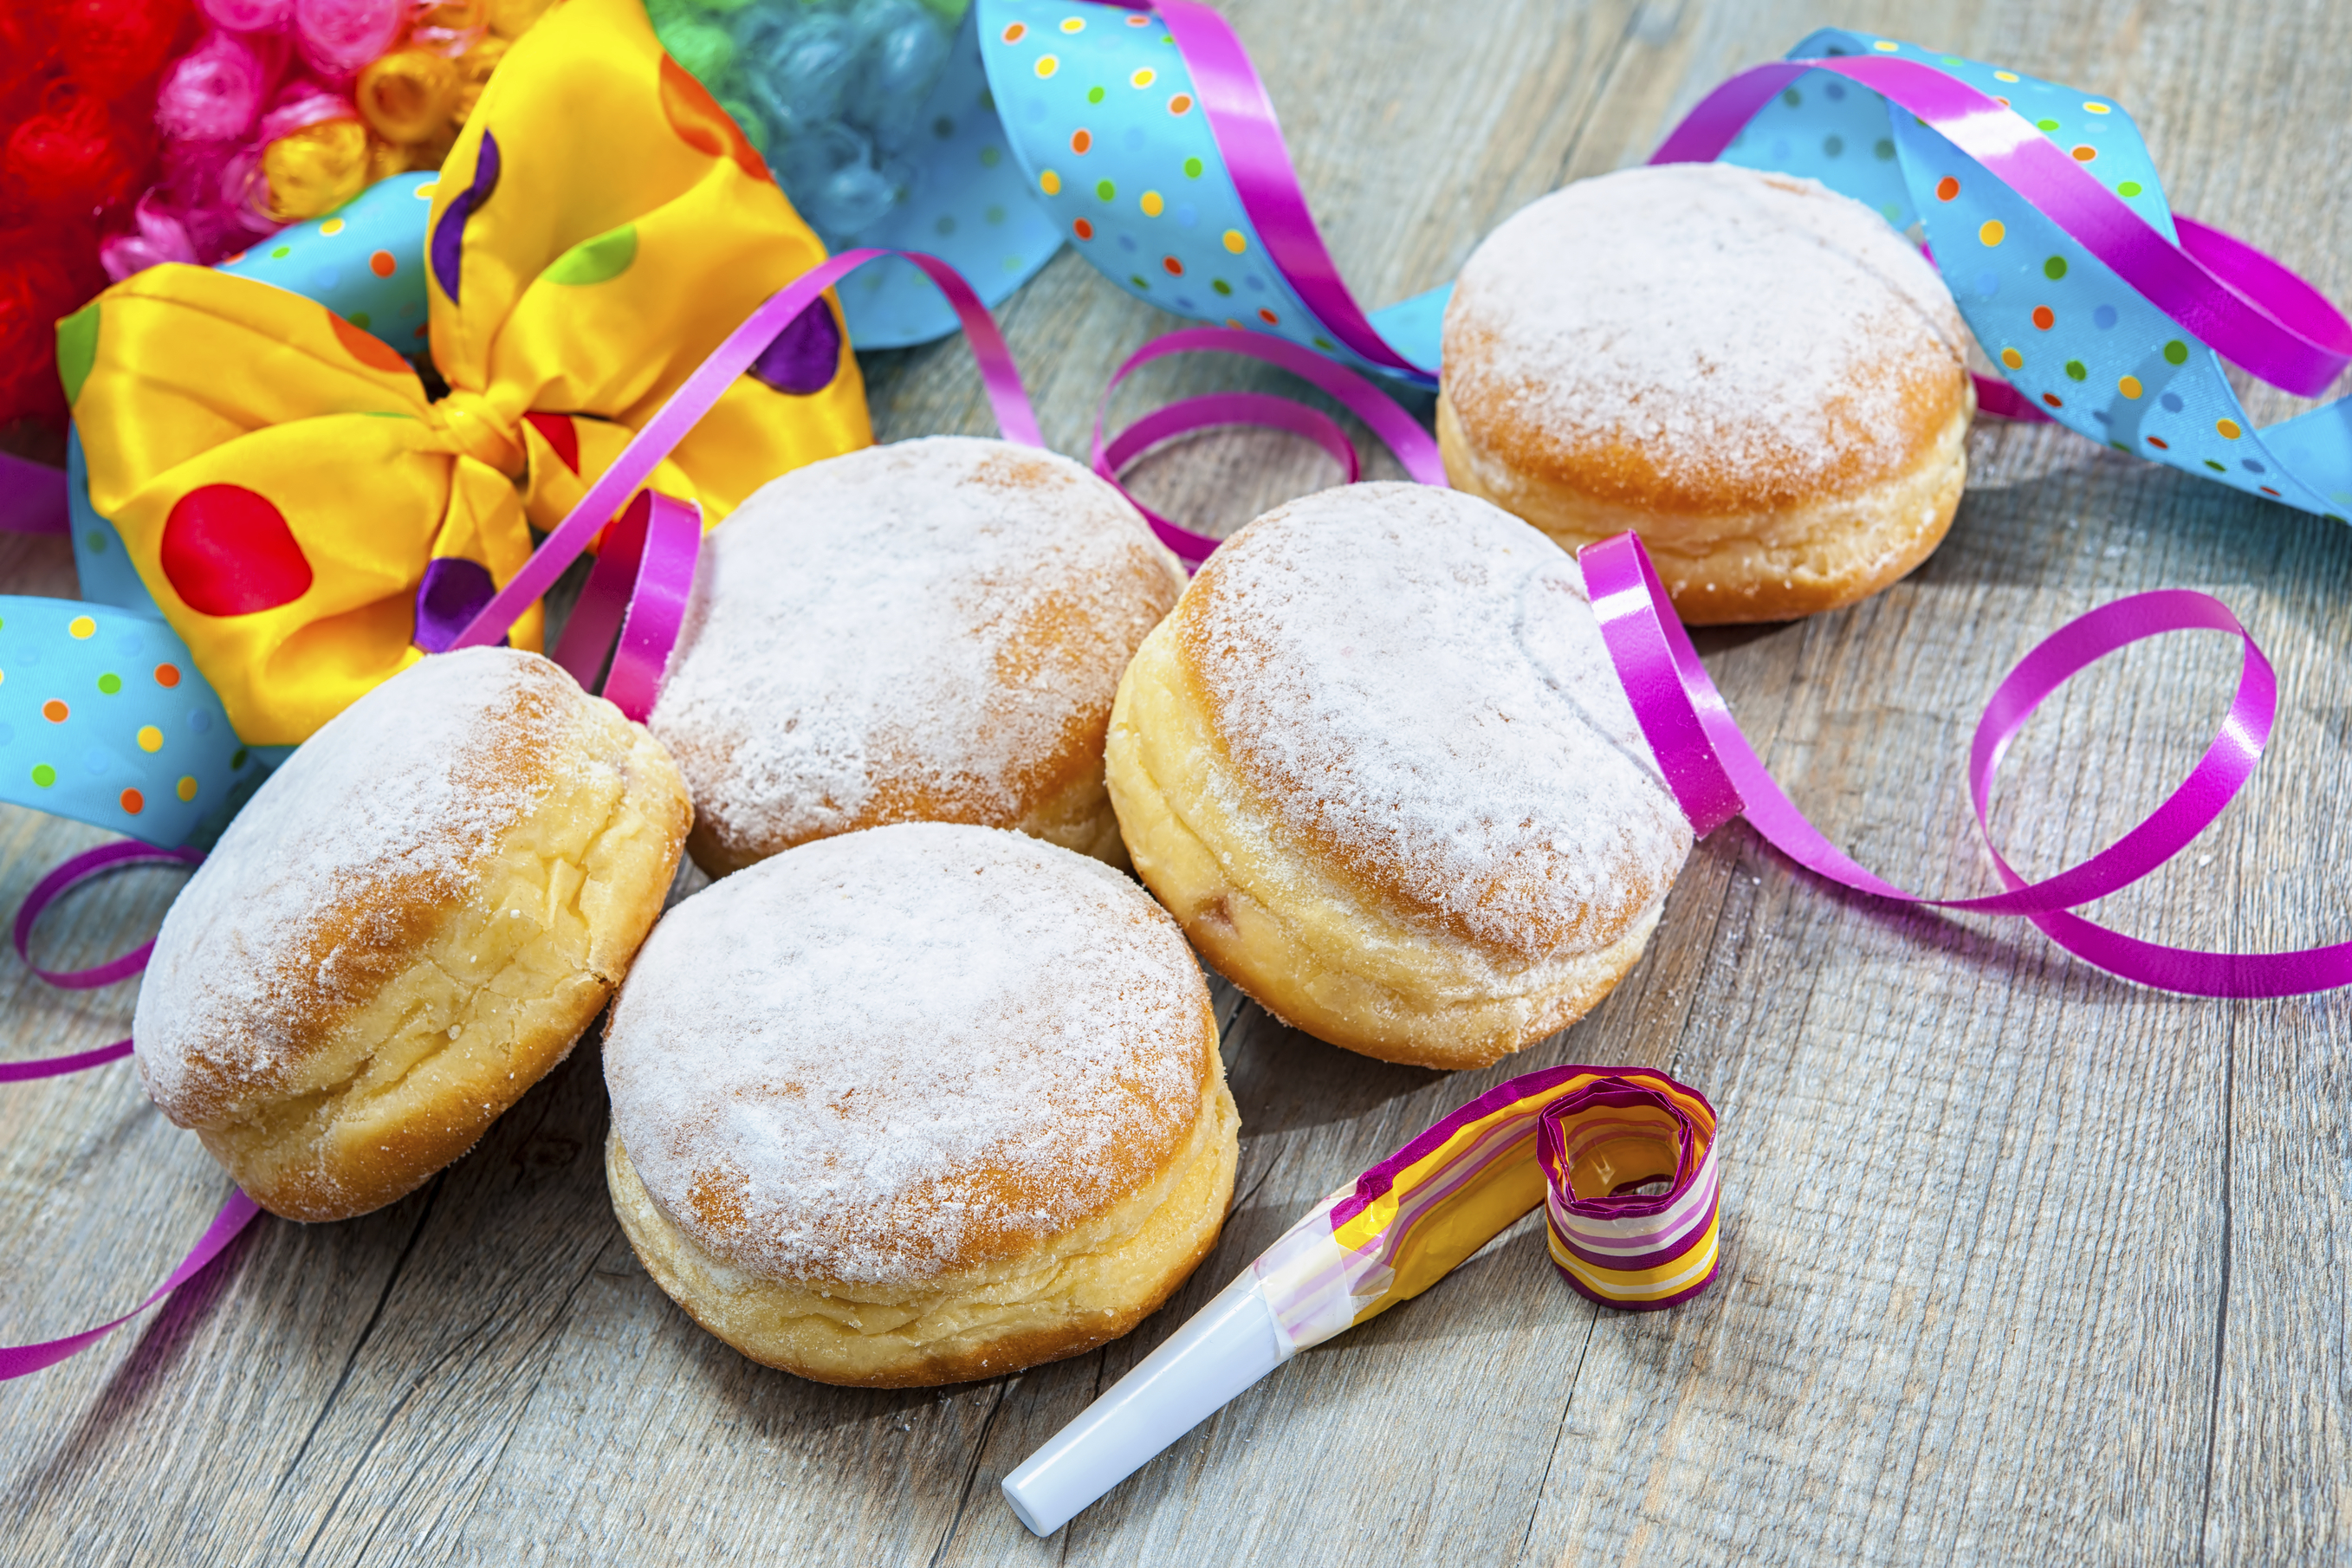 Krapfen or jelly doughnuts with jam and icing sugar